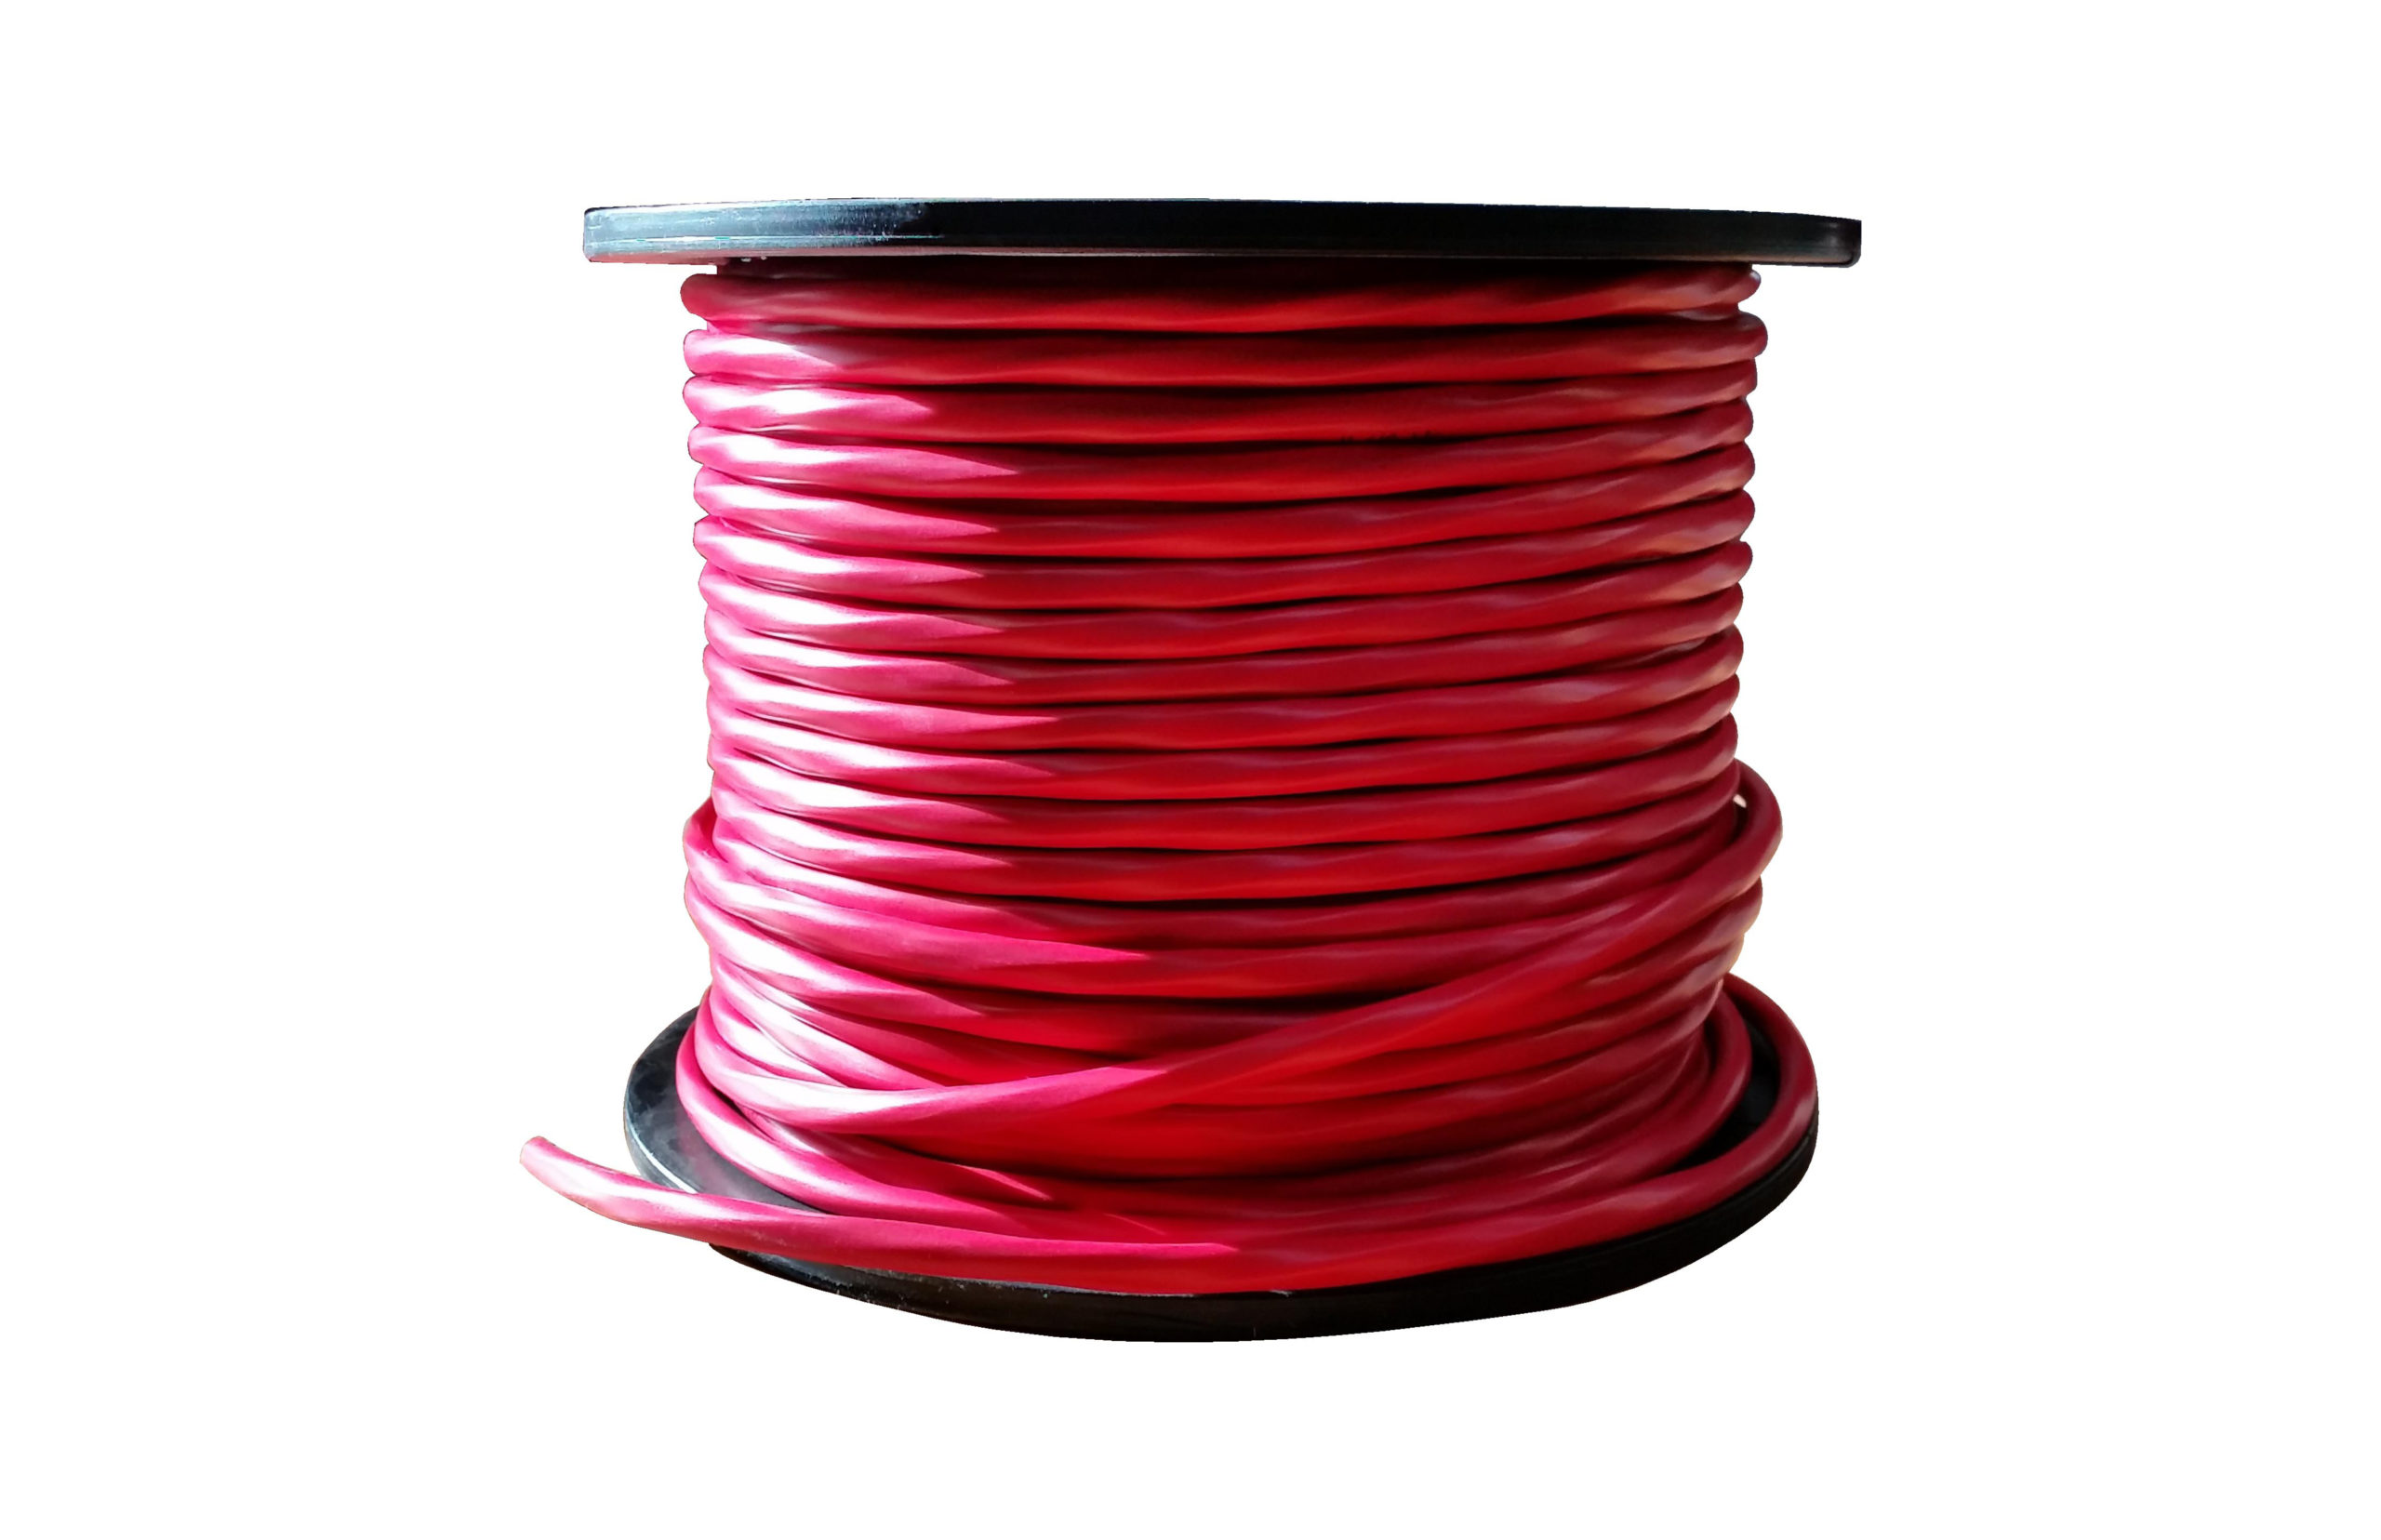 5 50 /100m Roll 3 7 9 /13 core/Multi core Irrigation wire/cable 0.5 sqmm 